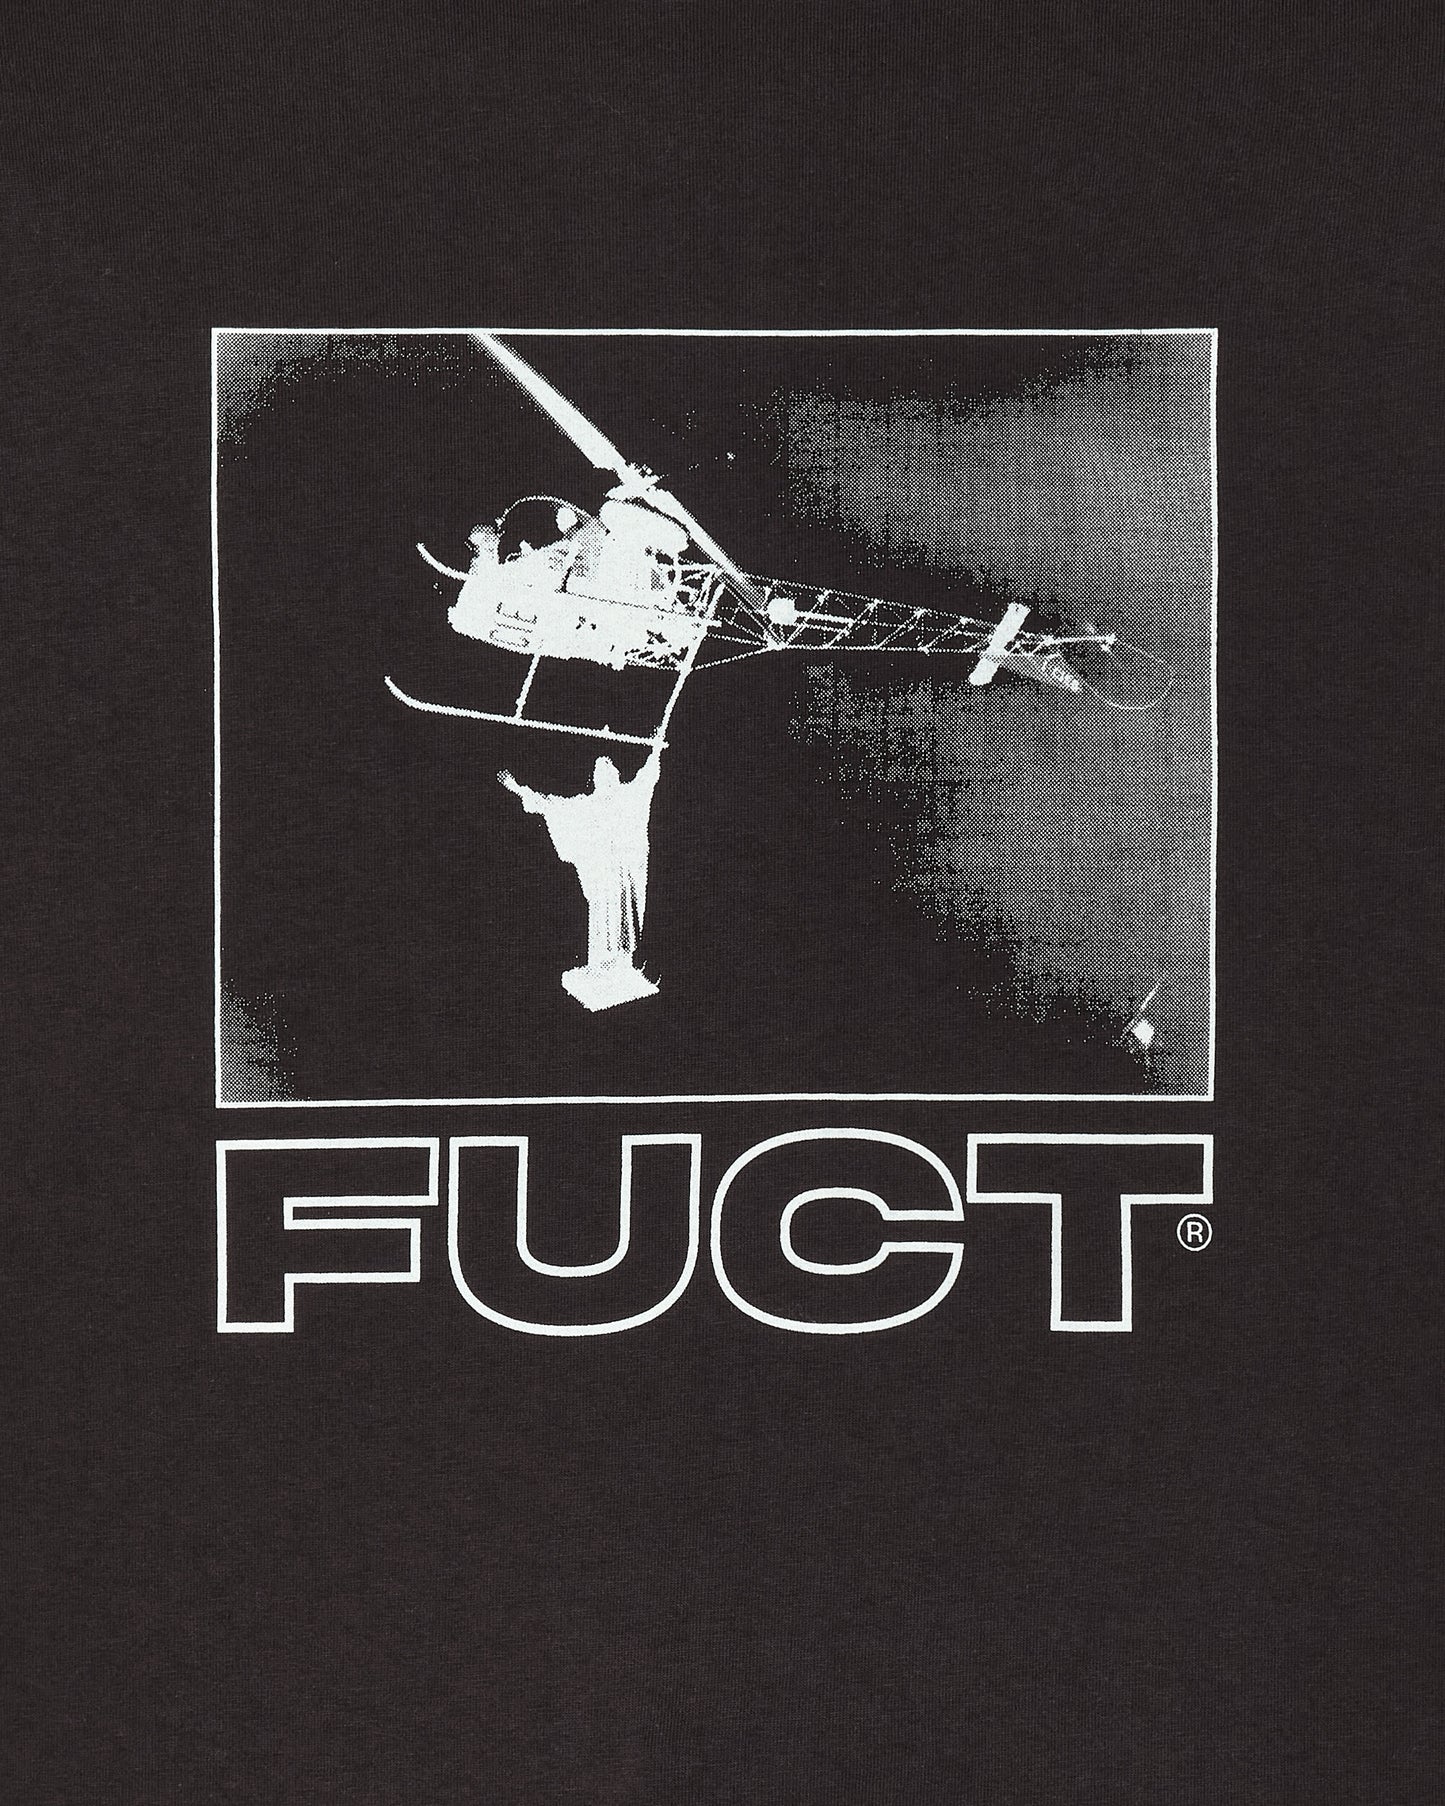 FUCT Helicopter Tee Black T-Shirts Shortsleeve TBMW092JY36 BLK0001